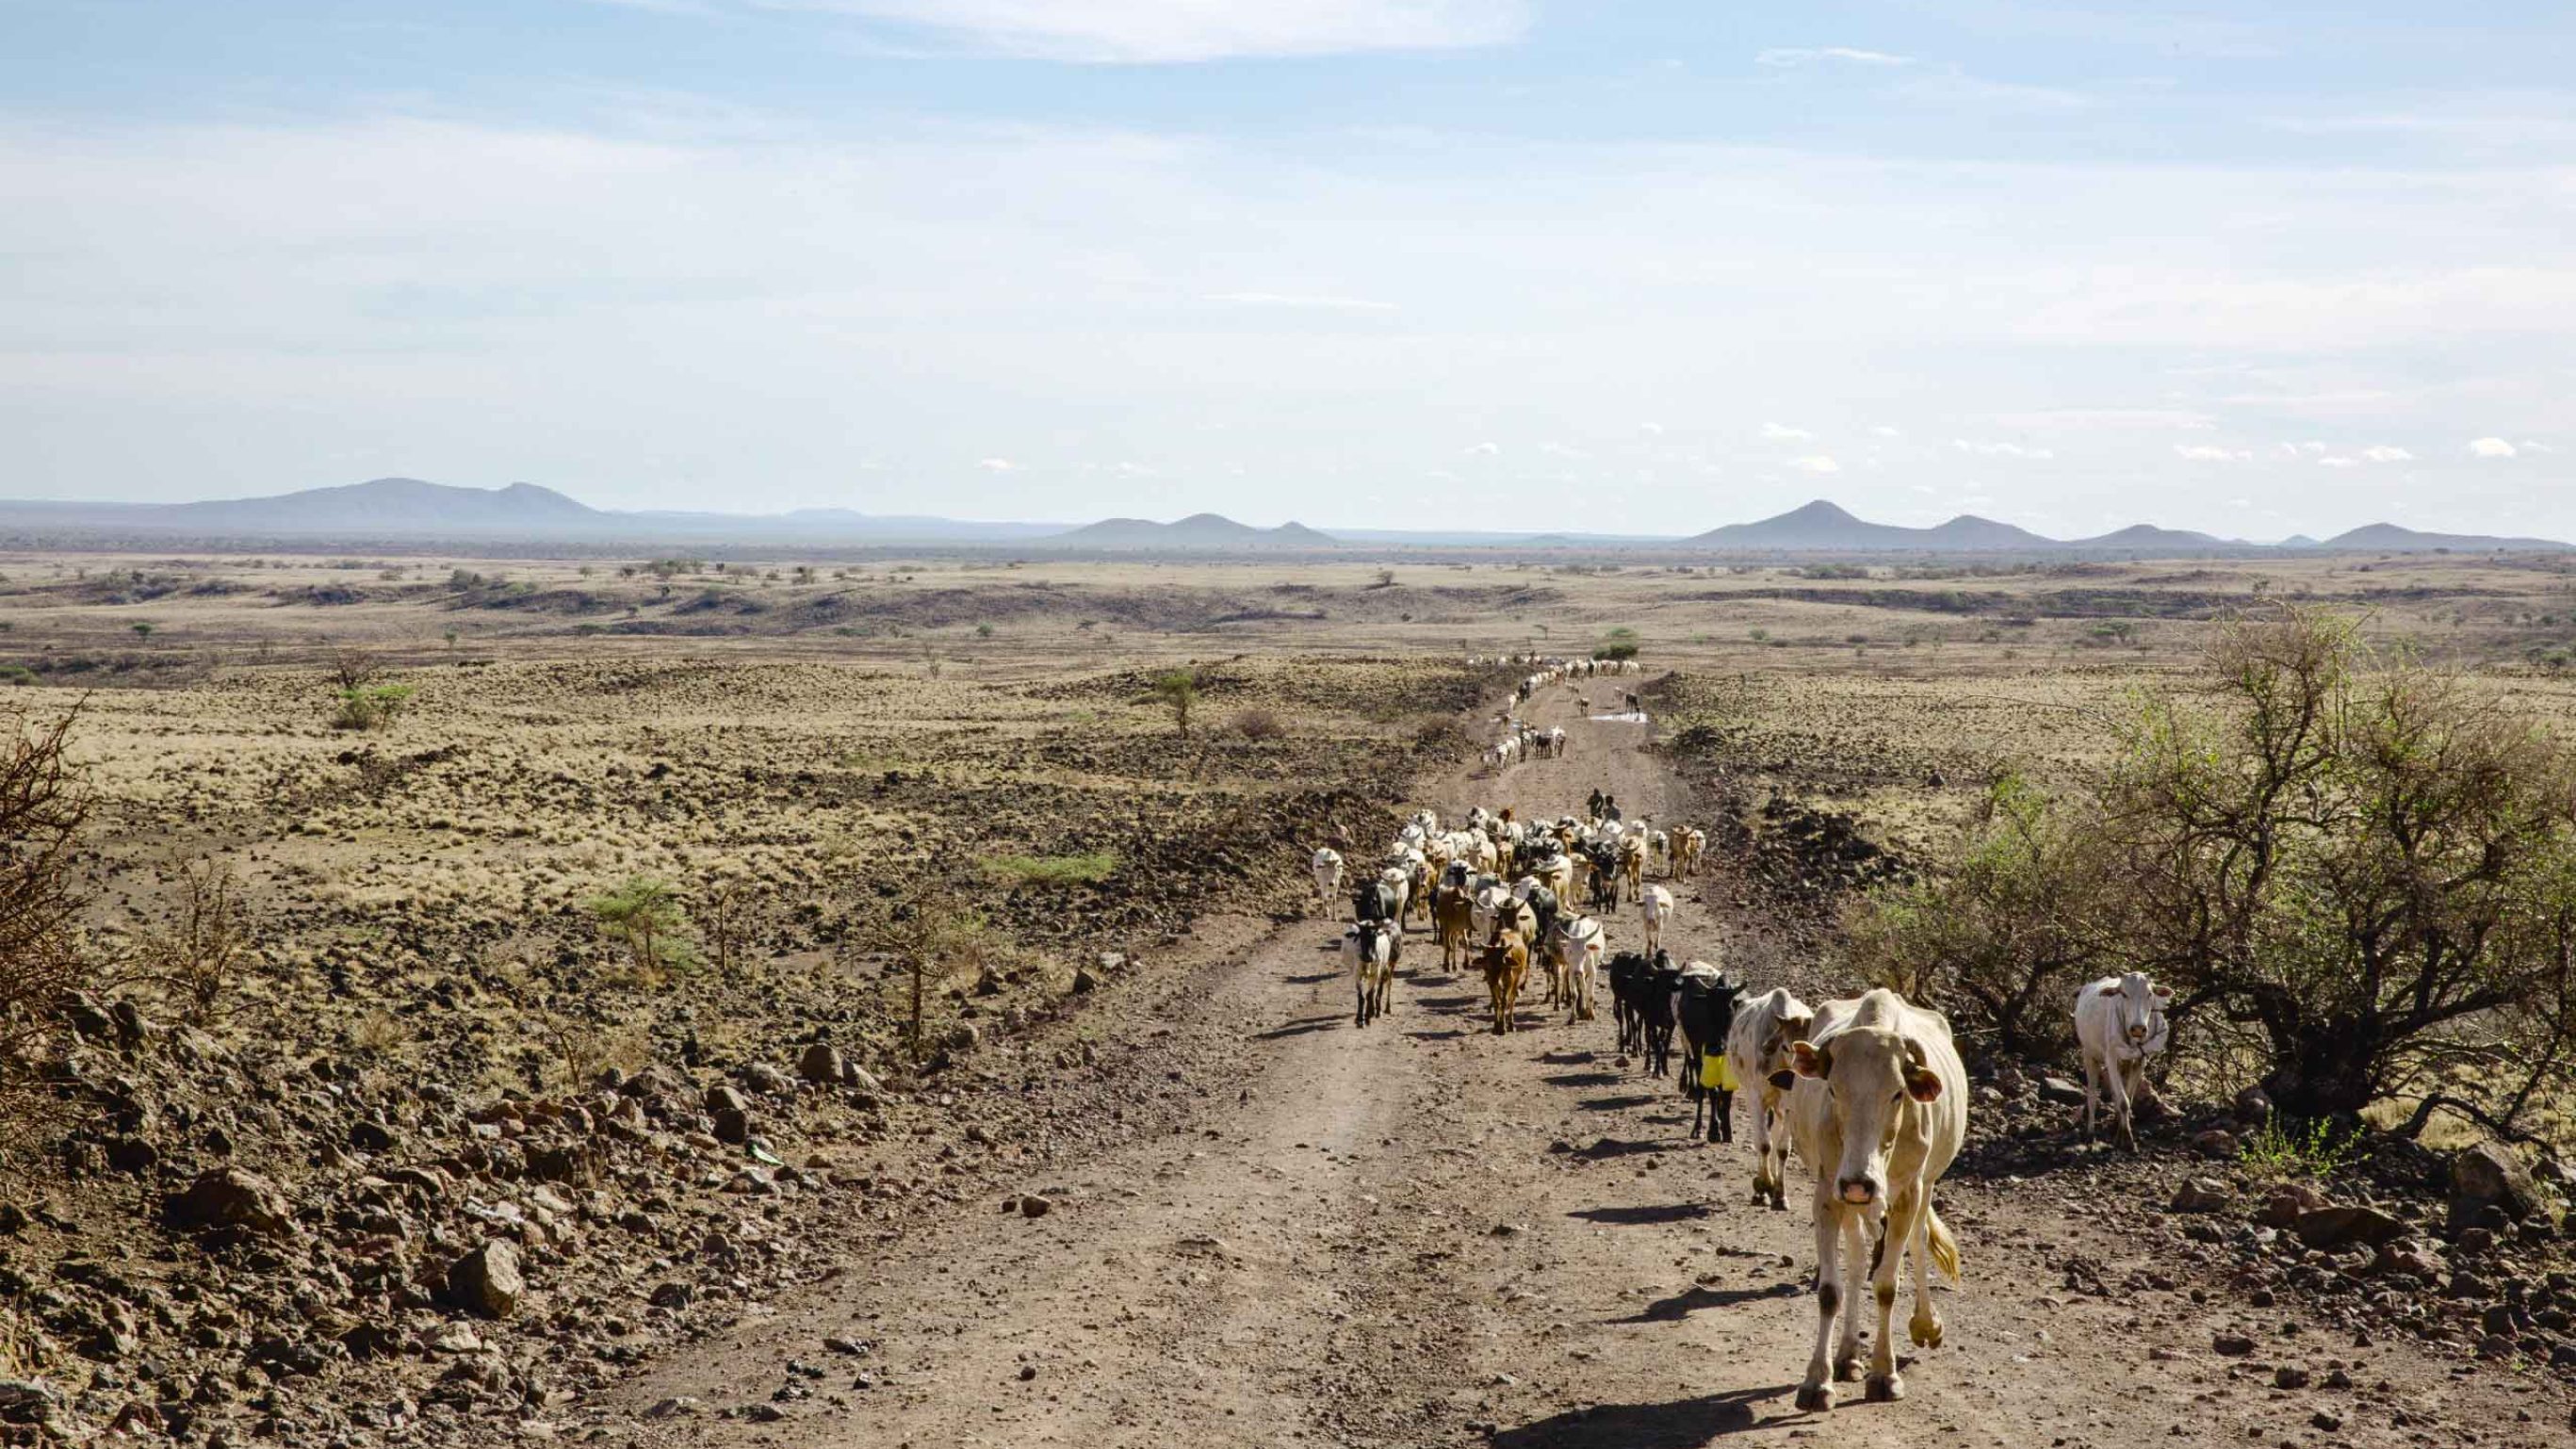 The pastoralists in Isiolo County live with their animals some considerable distance from any vet. They are on their own when it comes to the diagnosis and treatment of diseases in their herds.